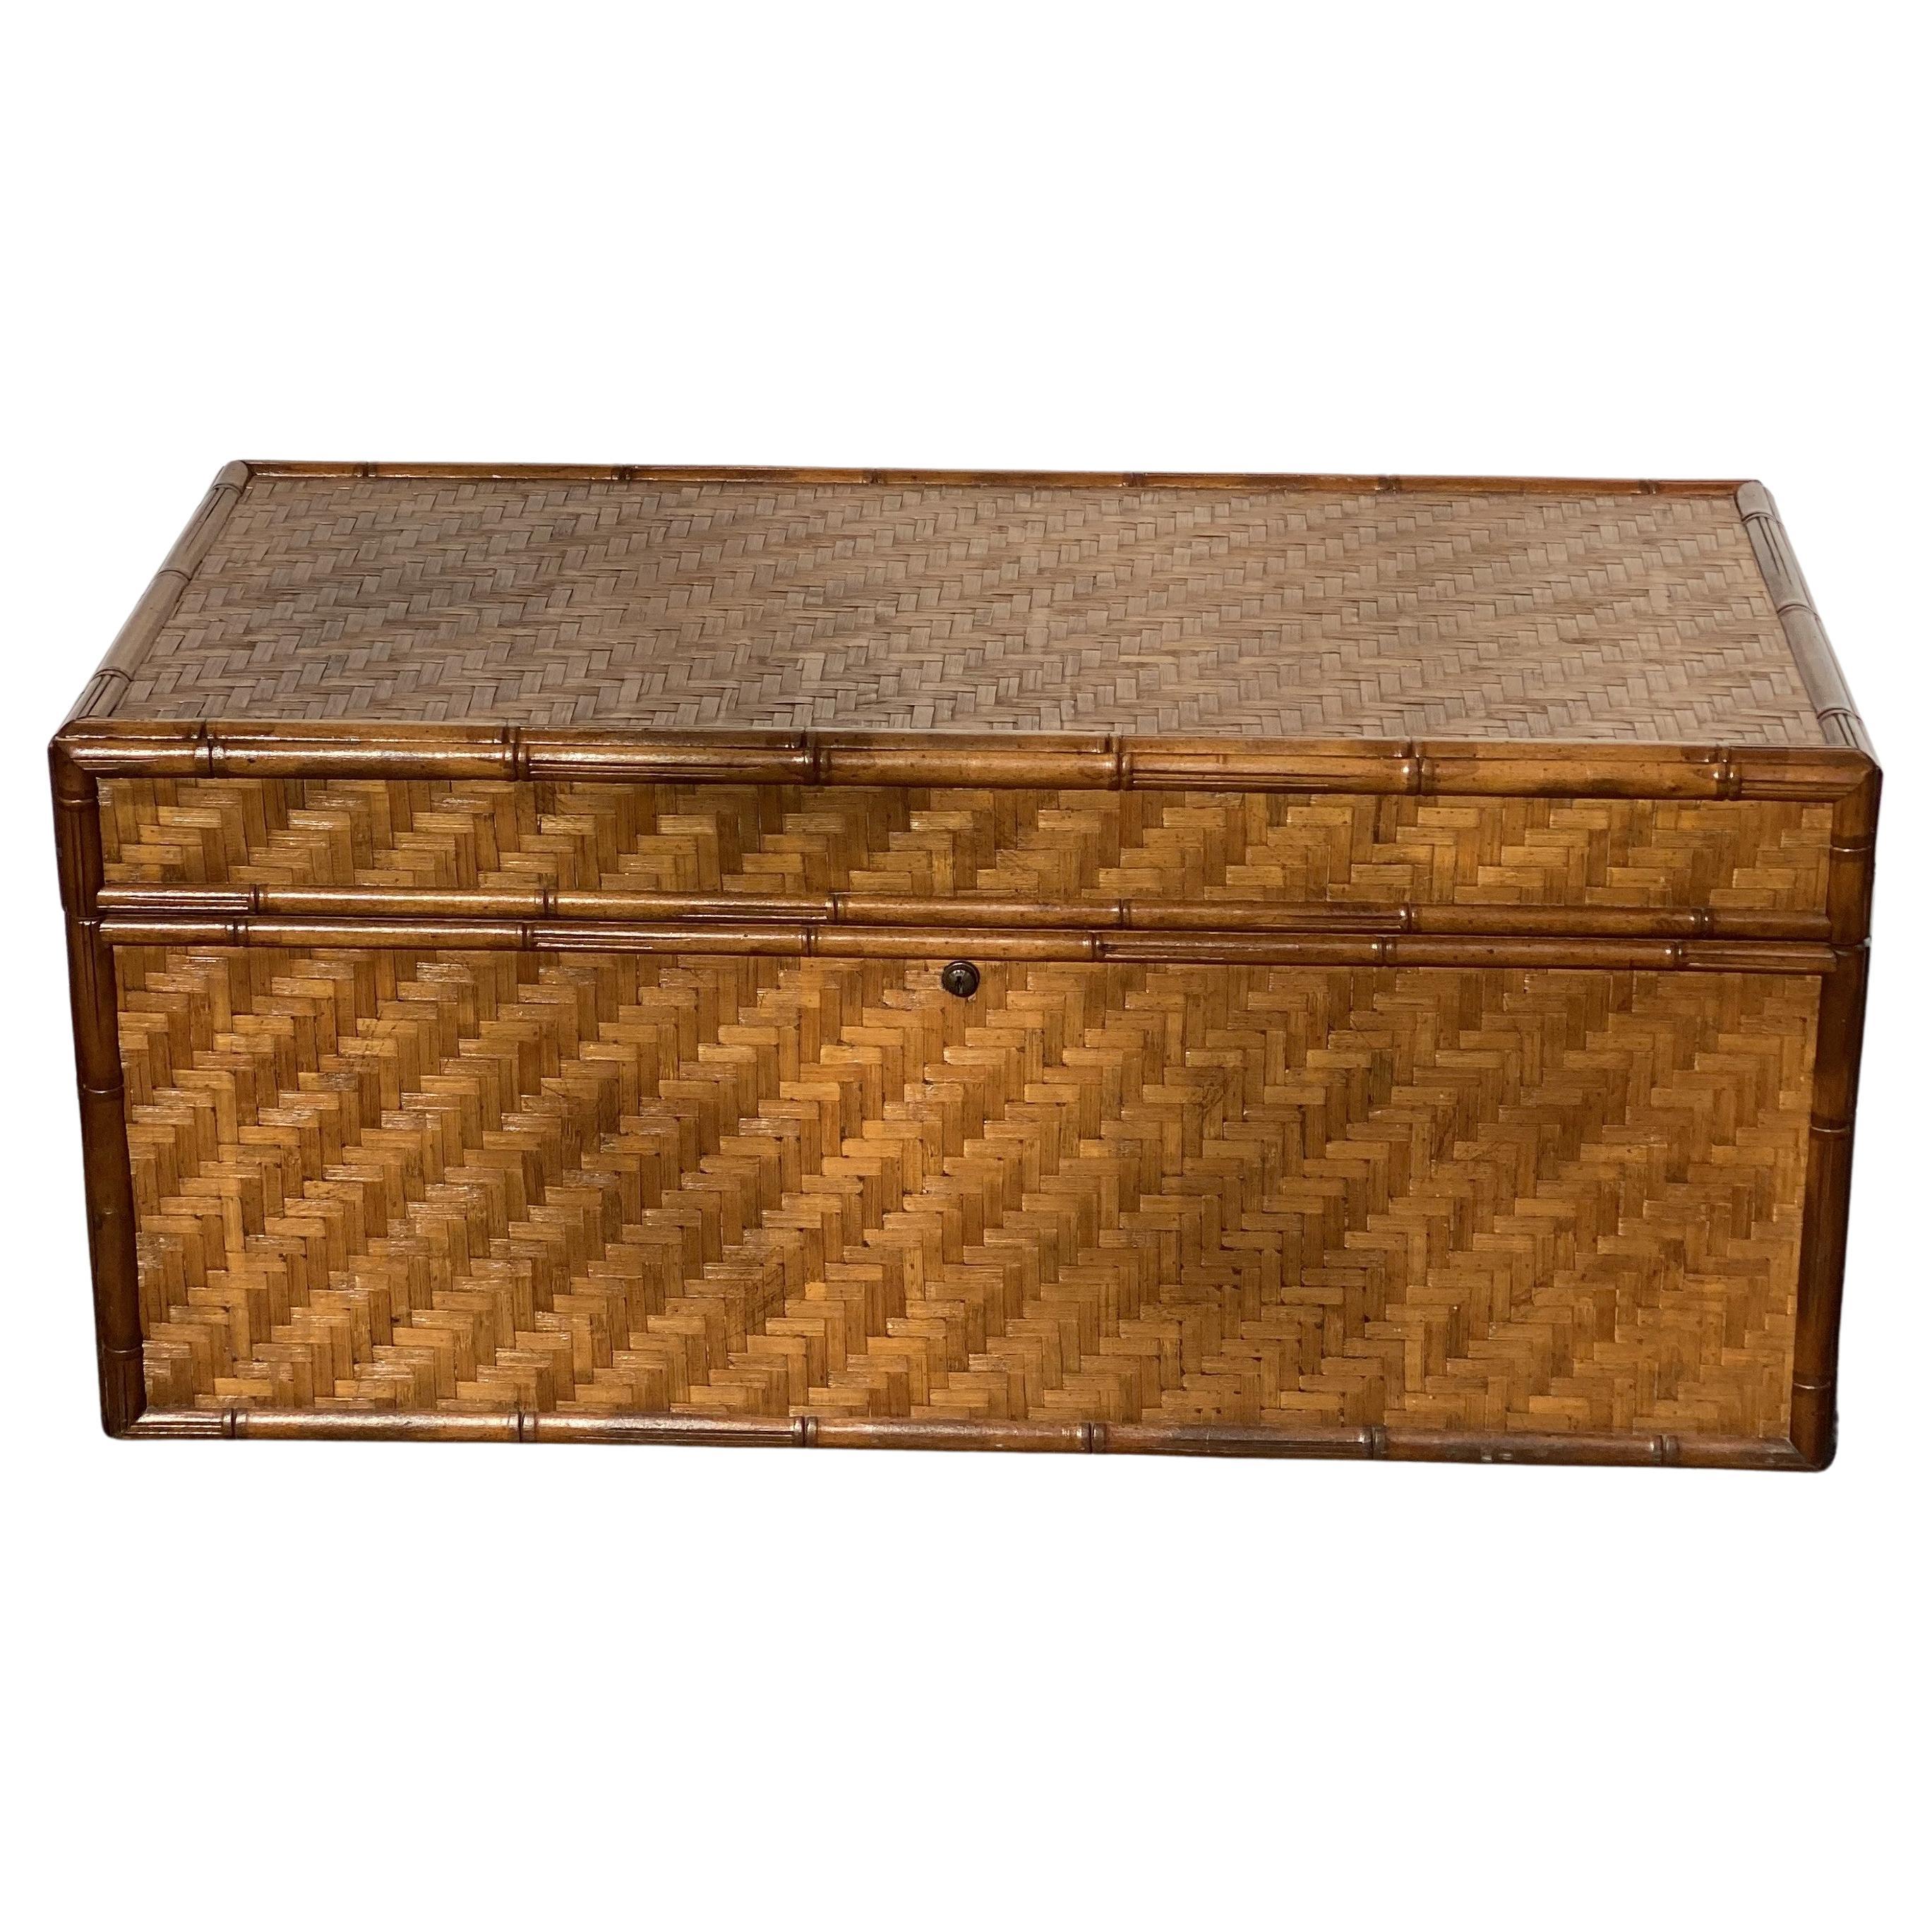 Mid-20th Century Lane Legacy Rattan Love Chest 
Unusual Lane Cedar Chest completely covered in Rattan and Bamboo over solid Cedar.
Lock does not work.   No key for lock. 
